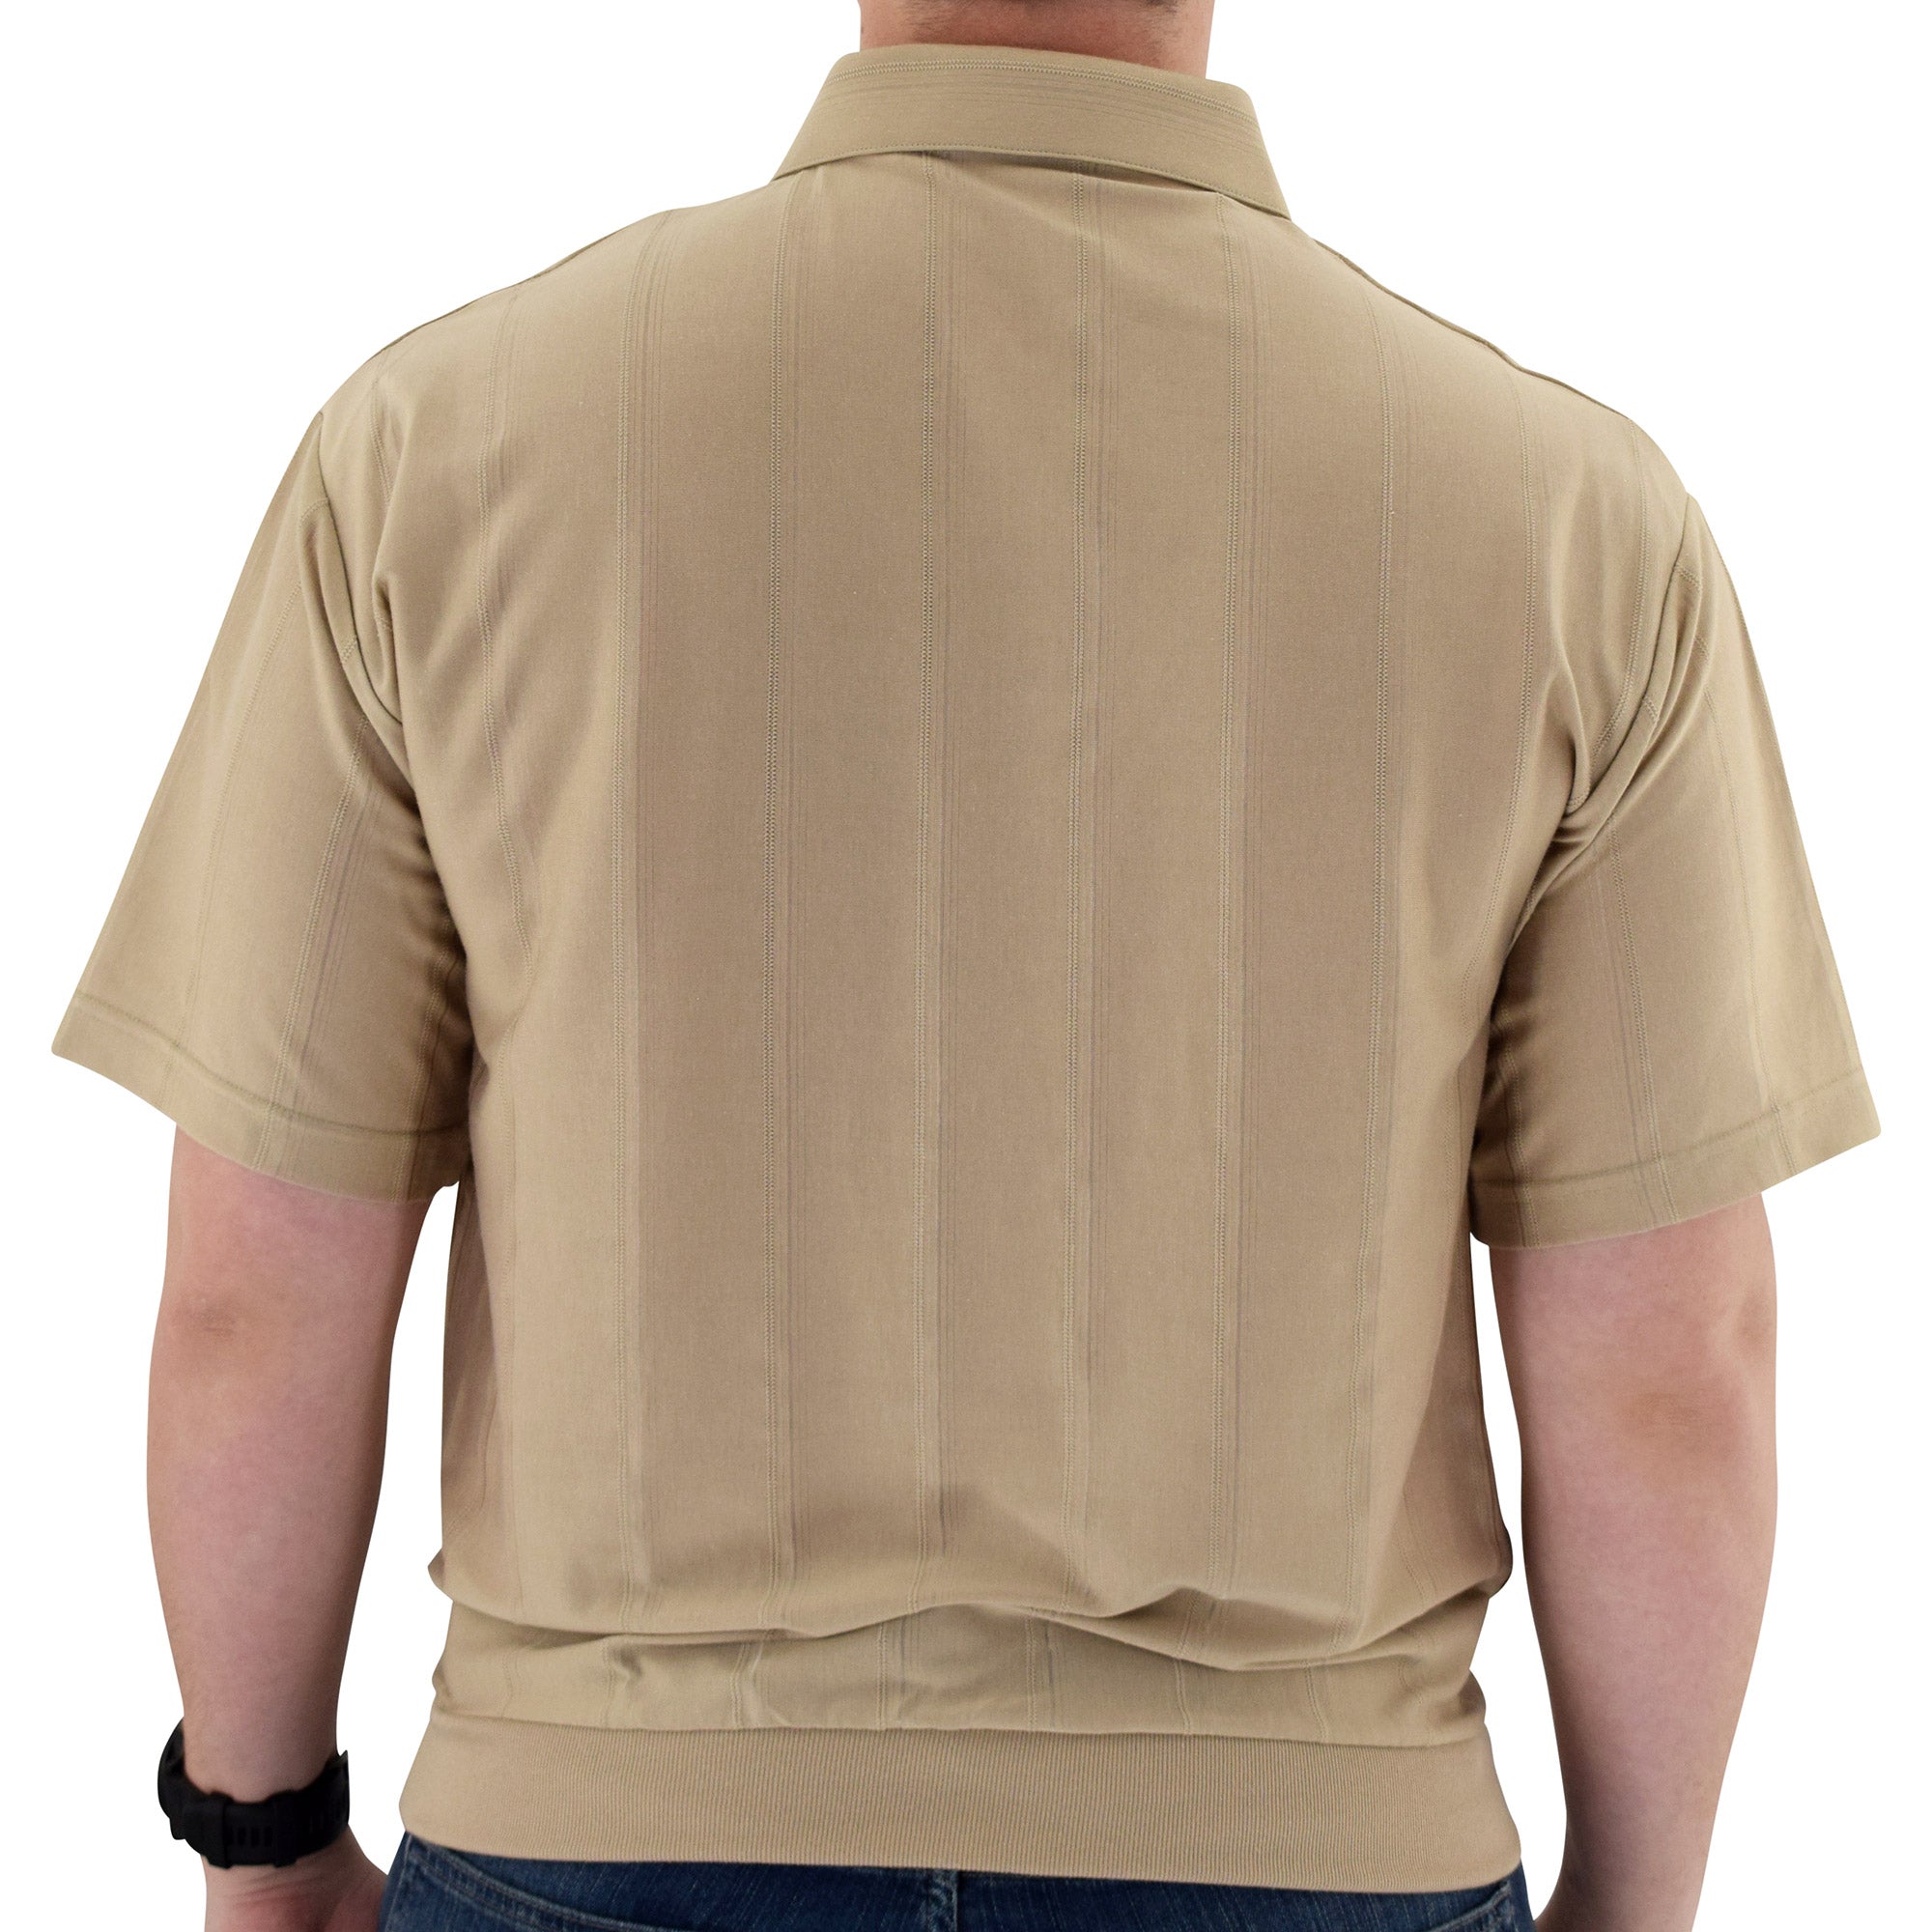 Big and Tall Tone on Tone Textured Knit Short Sleeve Banded Bottom Shirt - 6010-16BT - Taupe - theflagshirt